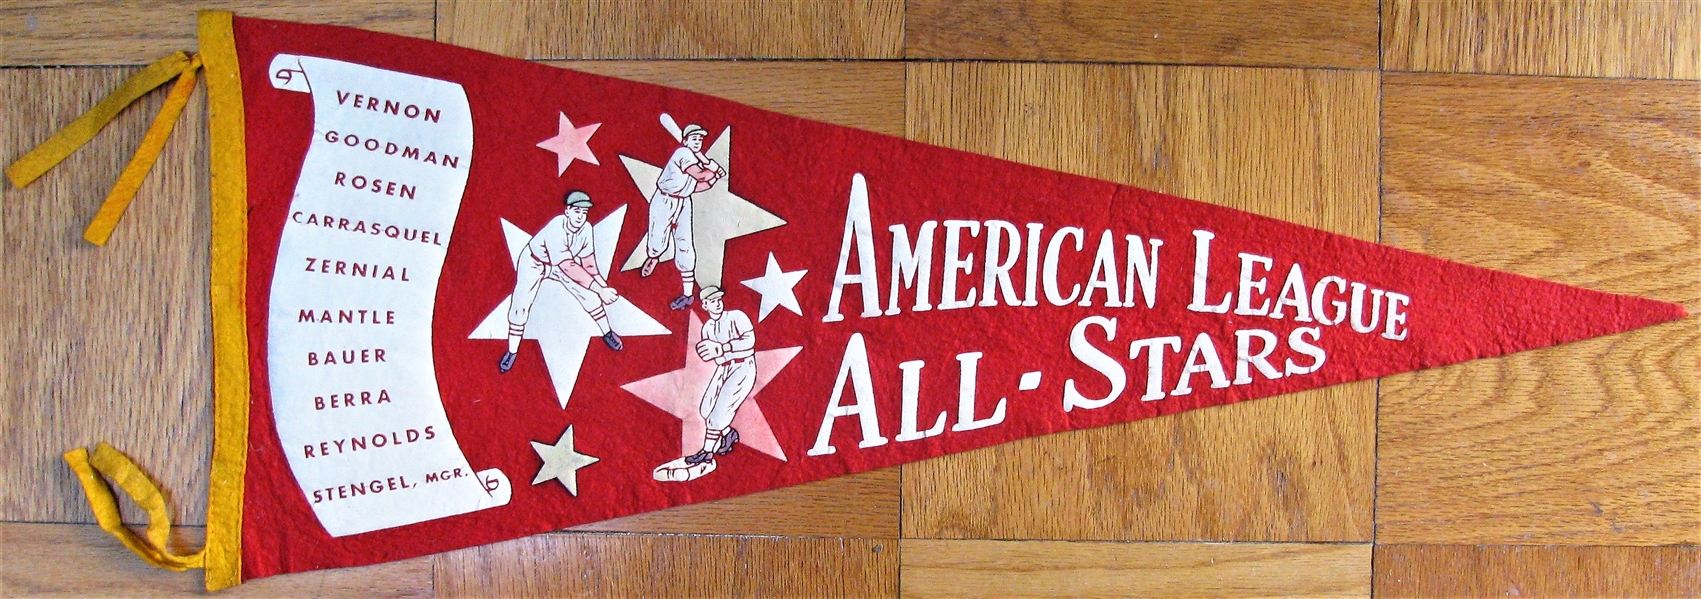 1953 ALL-STAR GAME PENNANT - AMERICAN LEAGUE VERSION w/ MANTLE